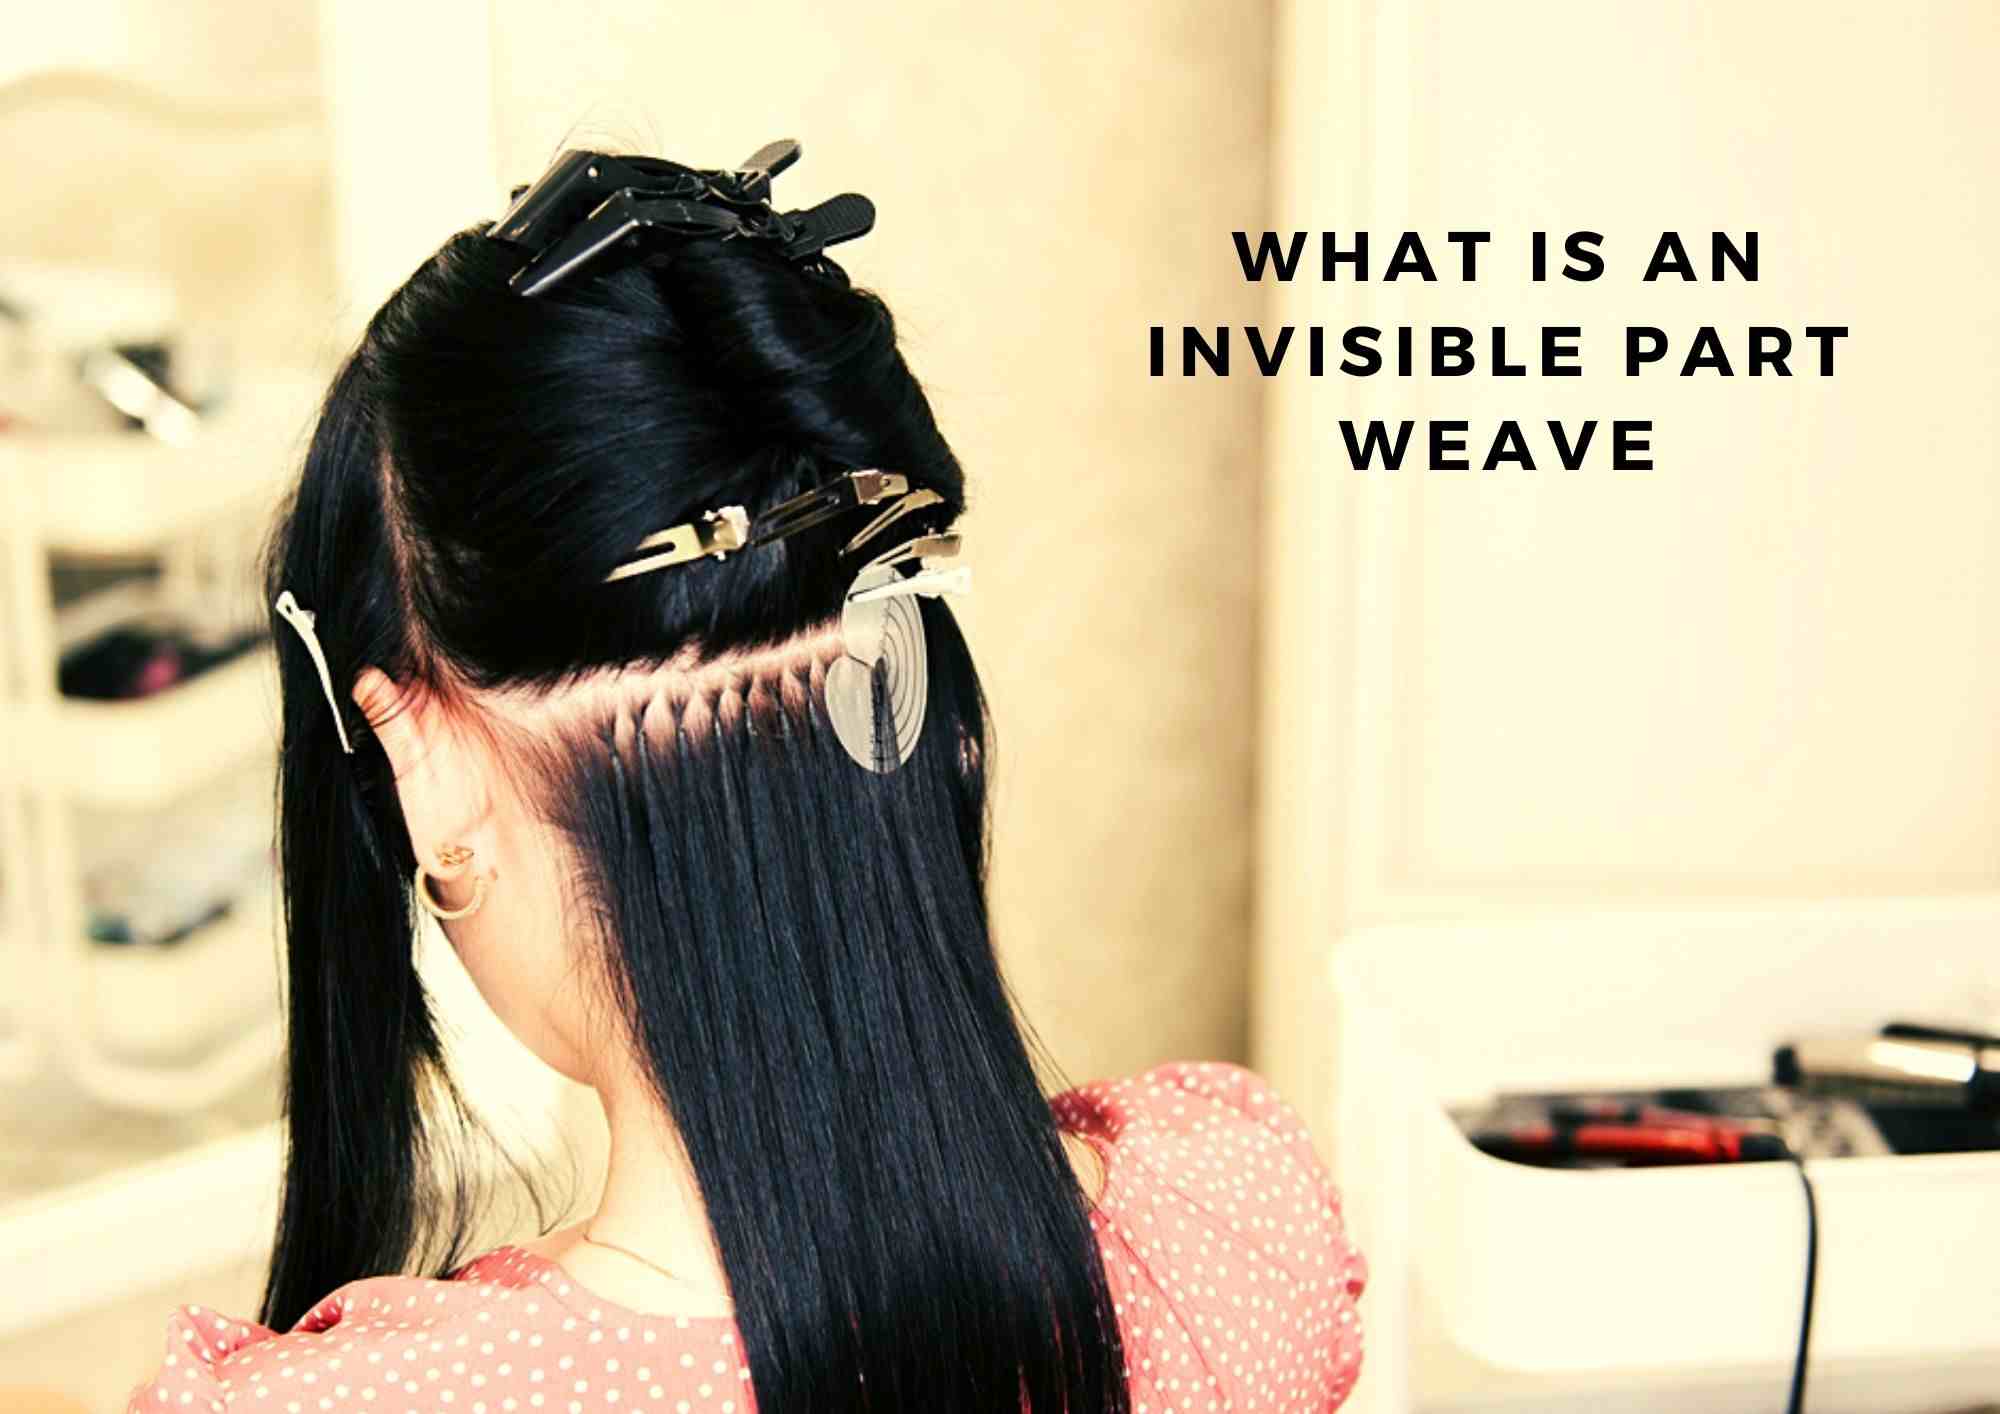 What is an invisible part weave